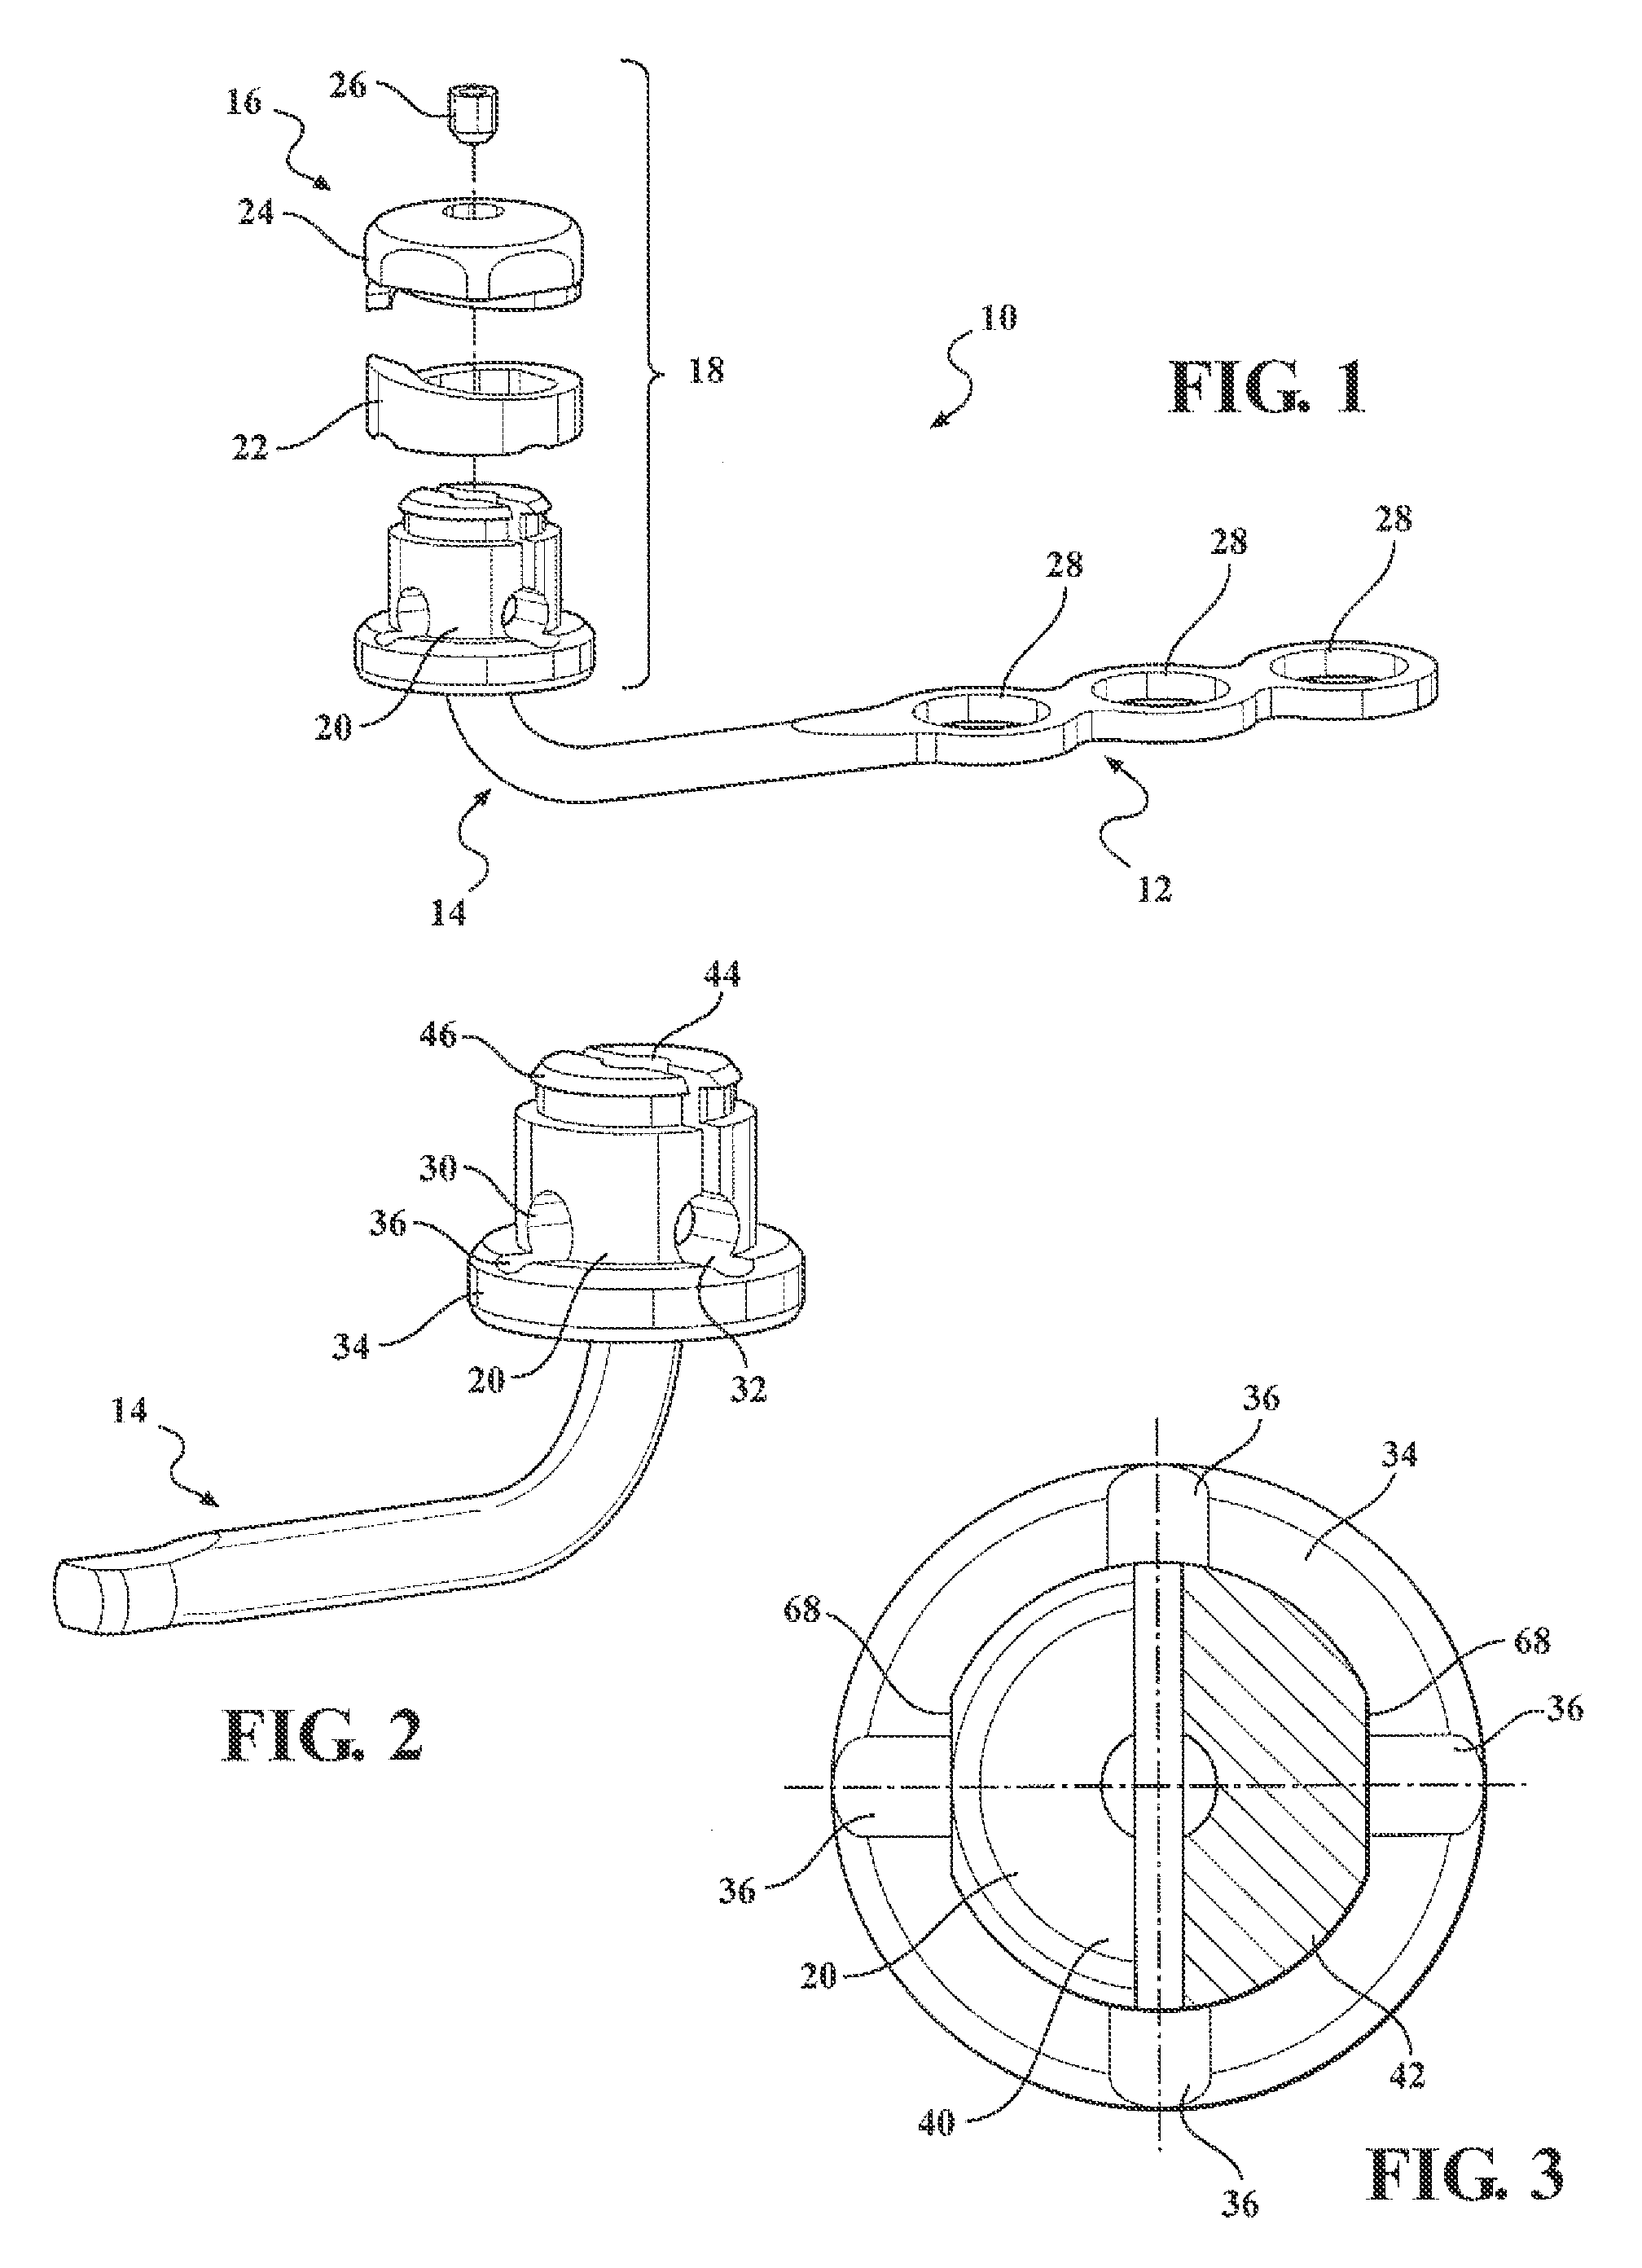 Surgical anchor device